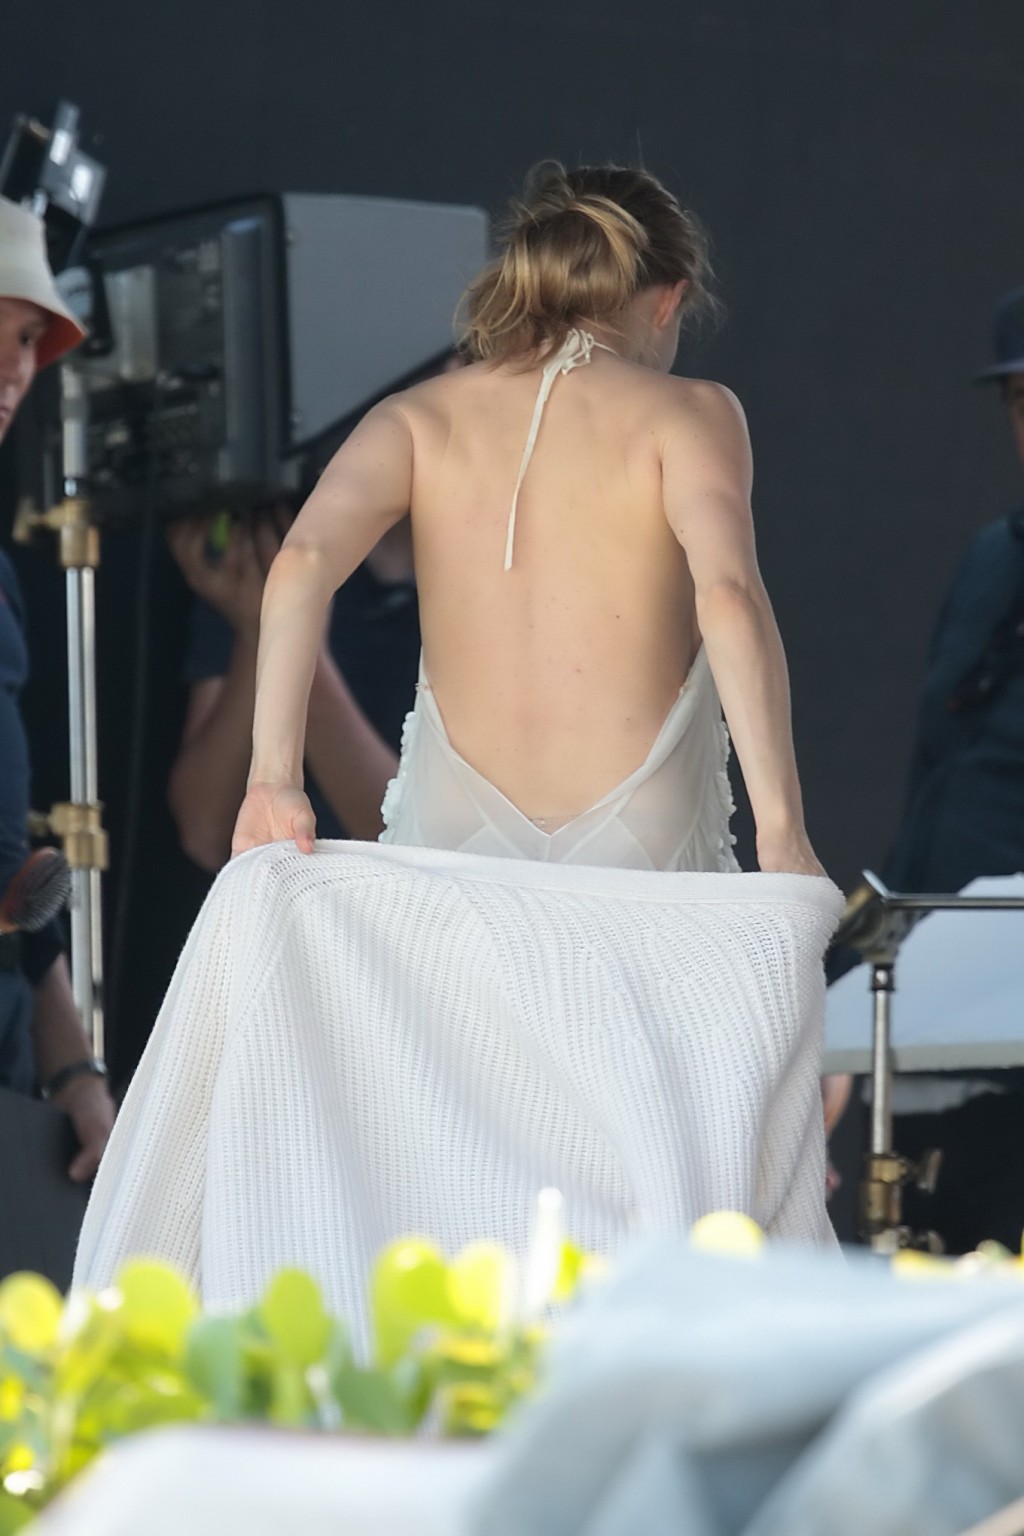 Amanda Seyfried showing boobs in white transparent nightie while filming video i #75172414